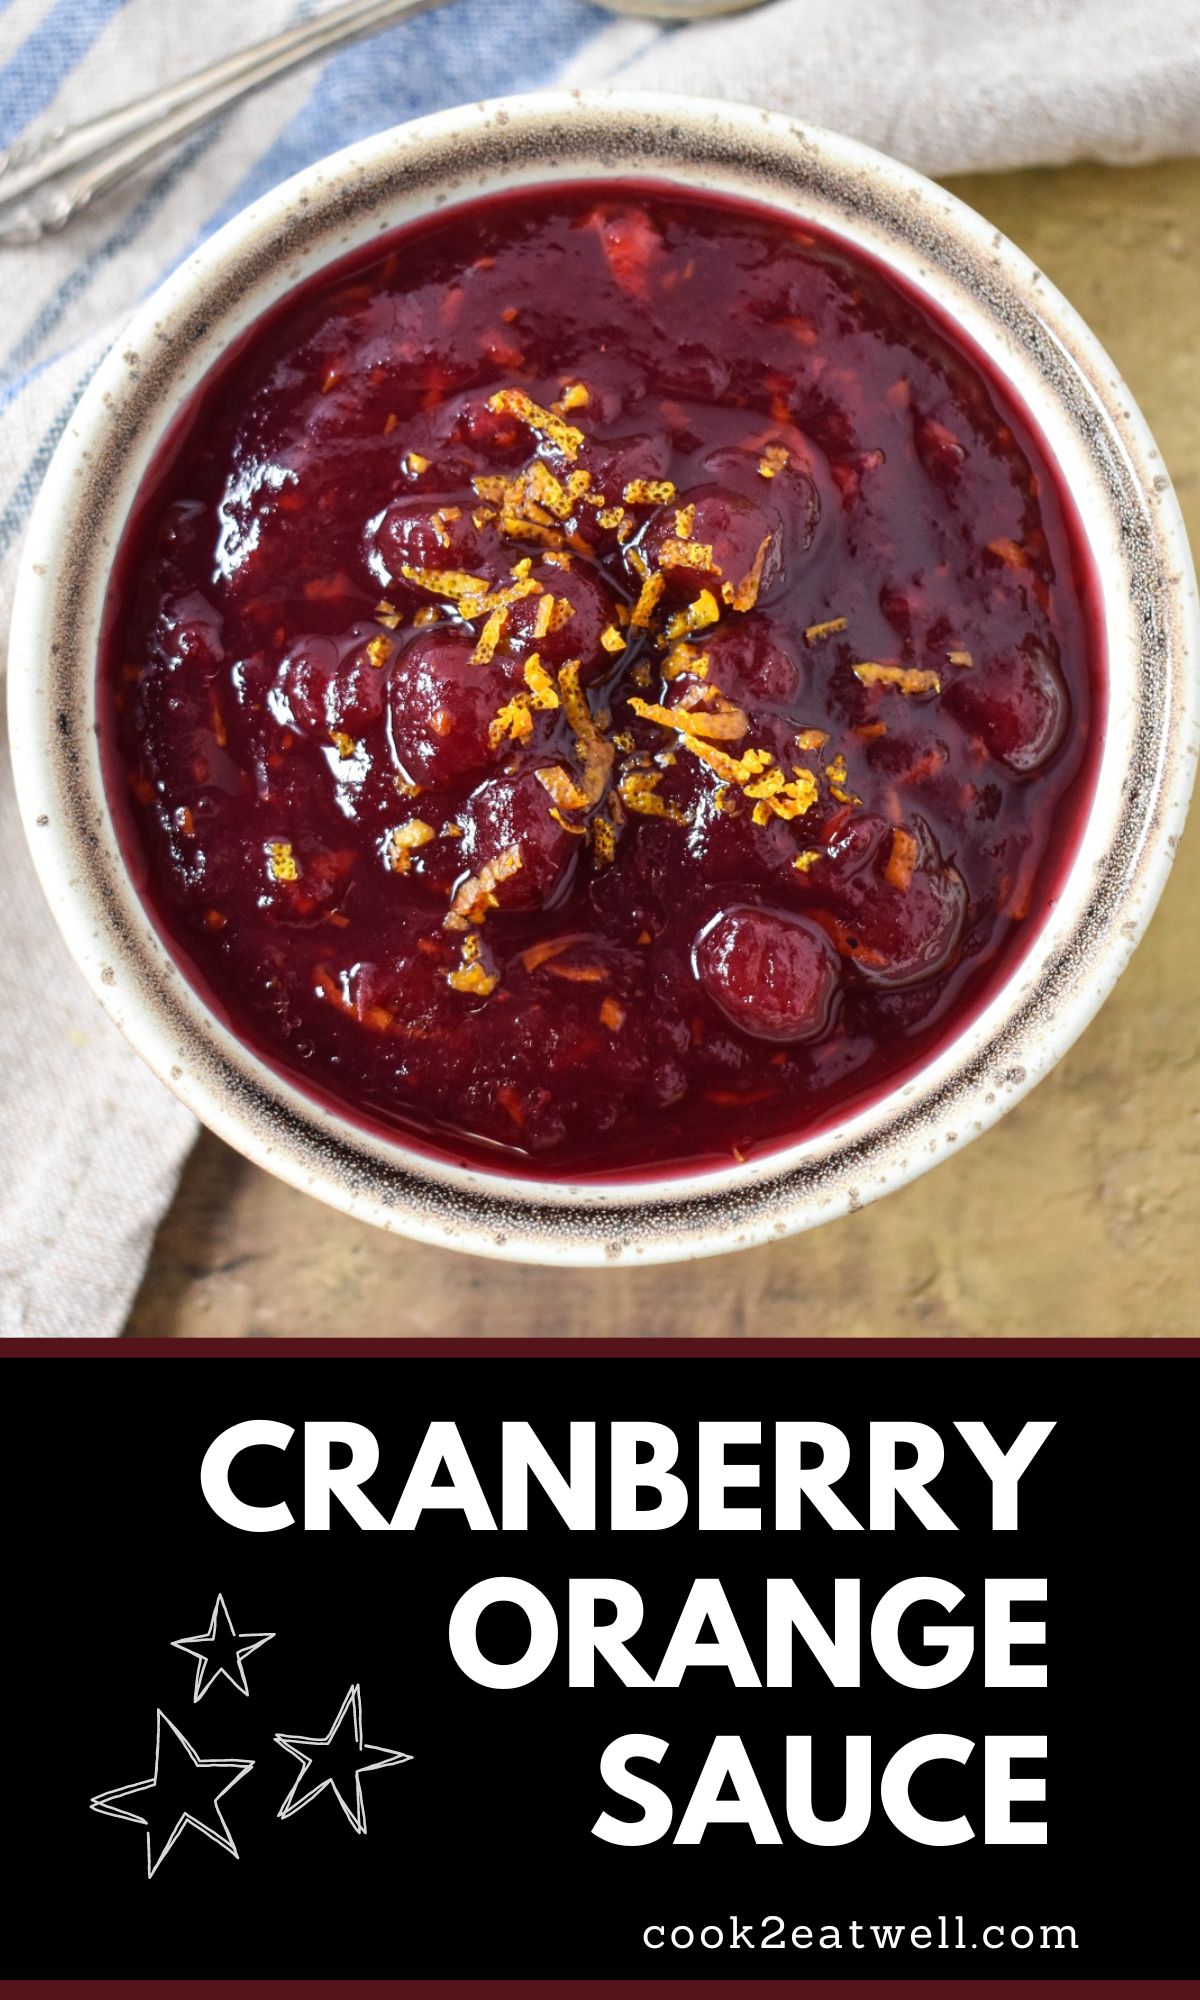 The finished cranberry sauce served in a small bowl with a black graphic underneath with the title in white letters.